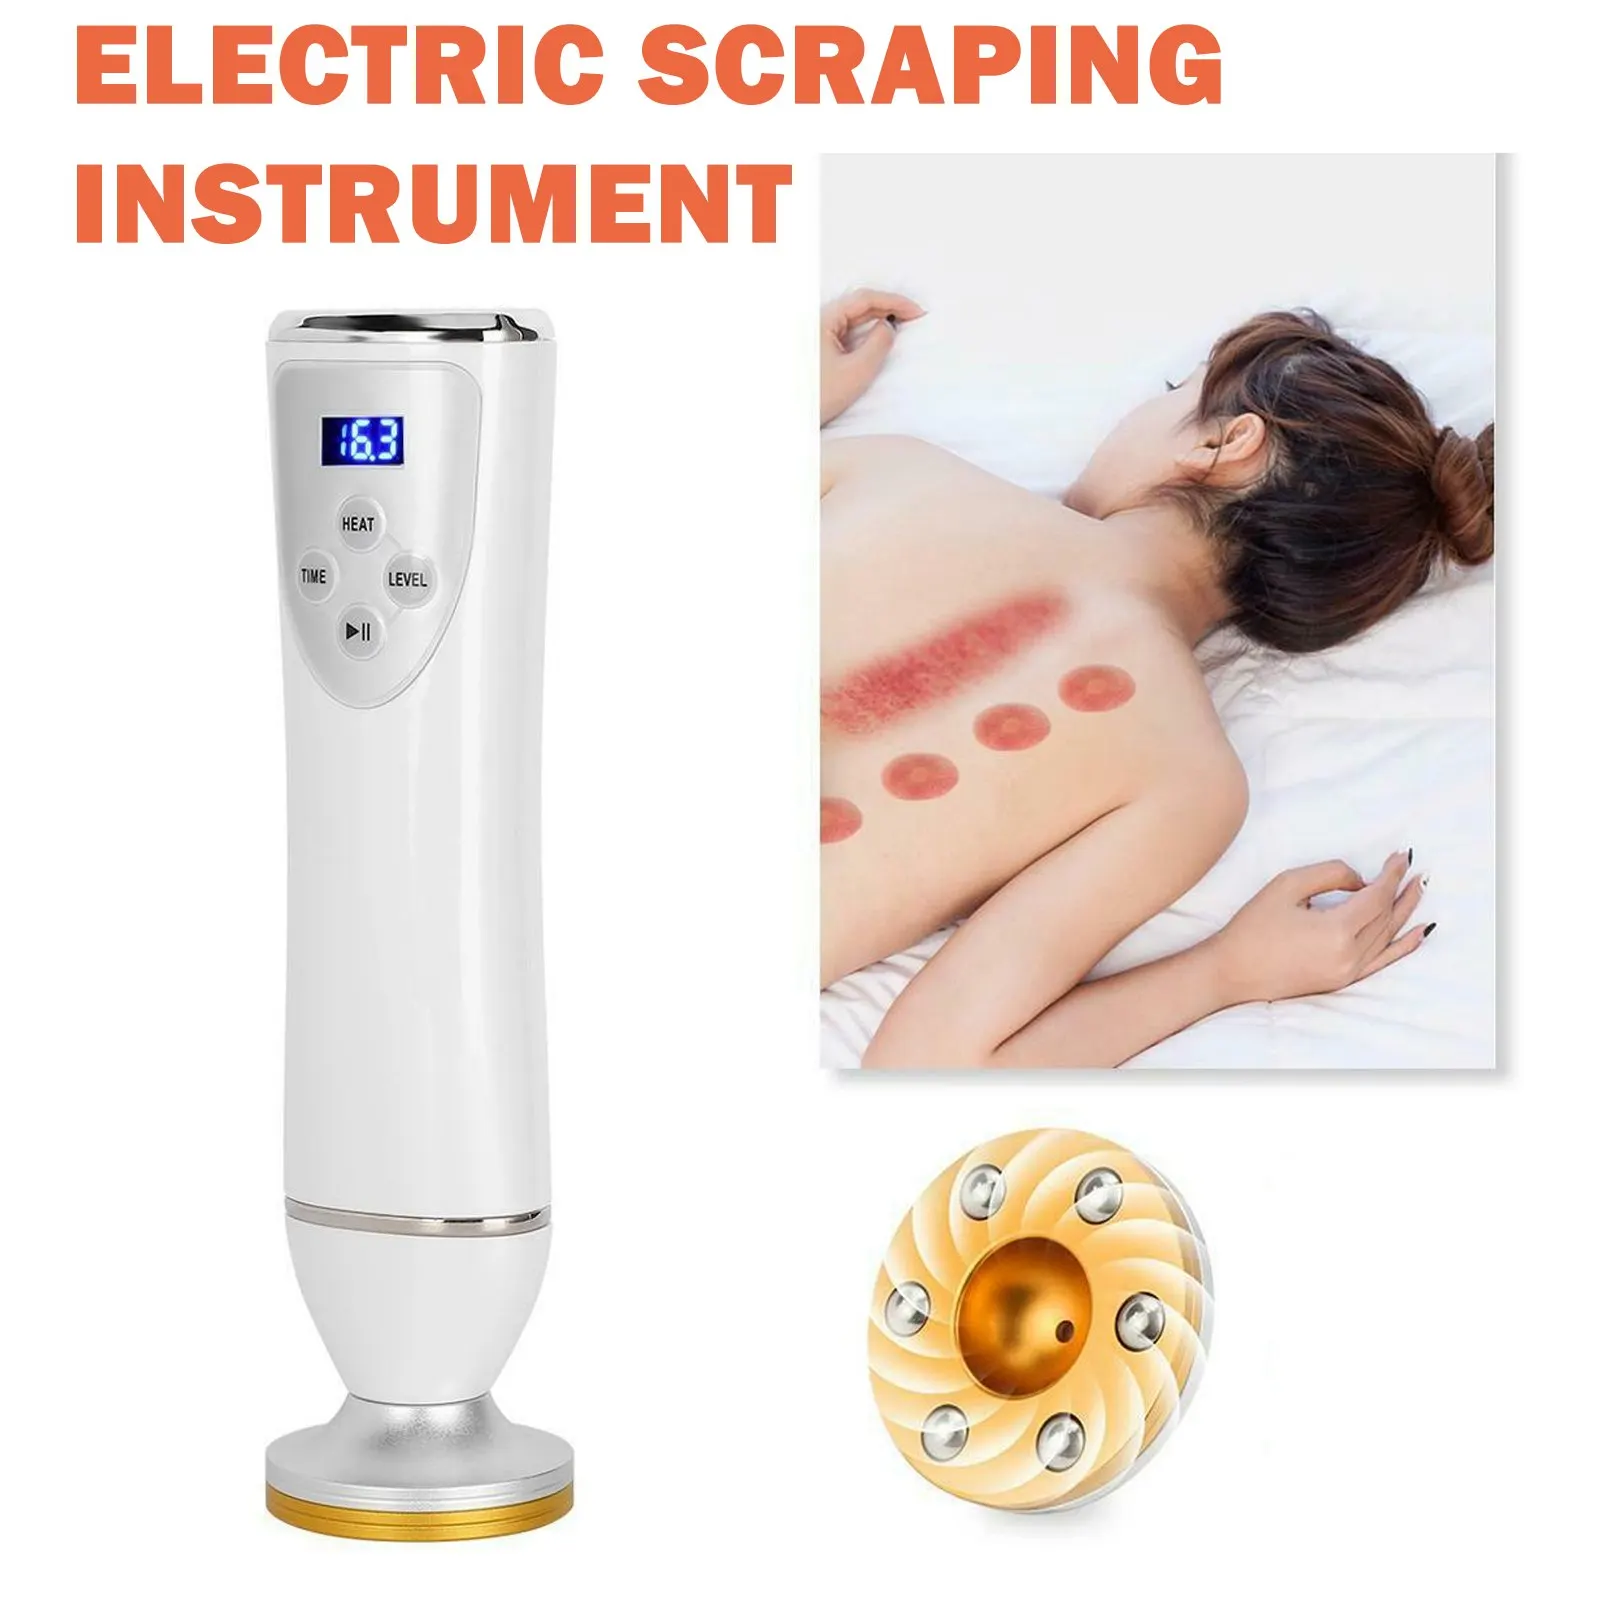 

Portable Electric Cupping Massager Body Detoxification Scraping Therapy Fat Burning Meridian Dredging Body Care Physiotherapy